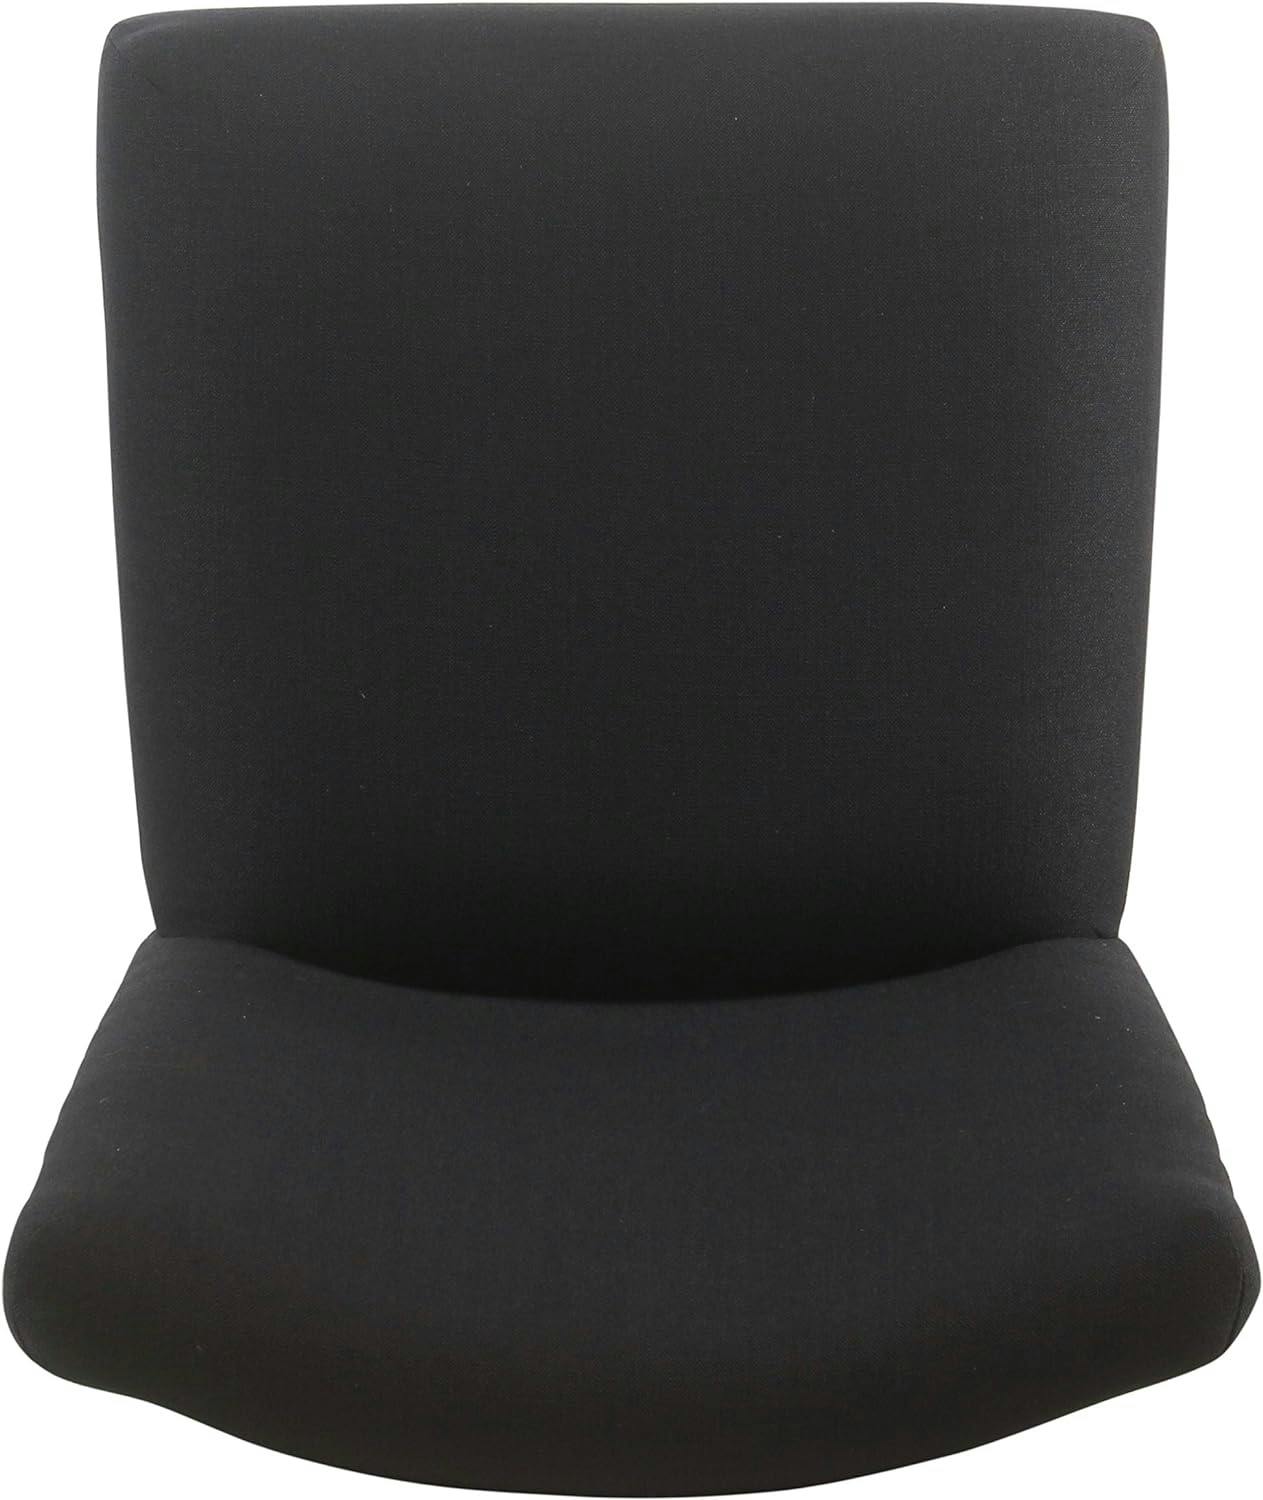 Navy Elegance 24" Upholstered Counter Stool with Nailhead Trim